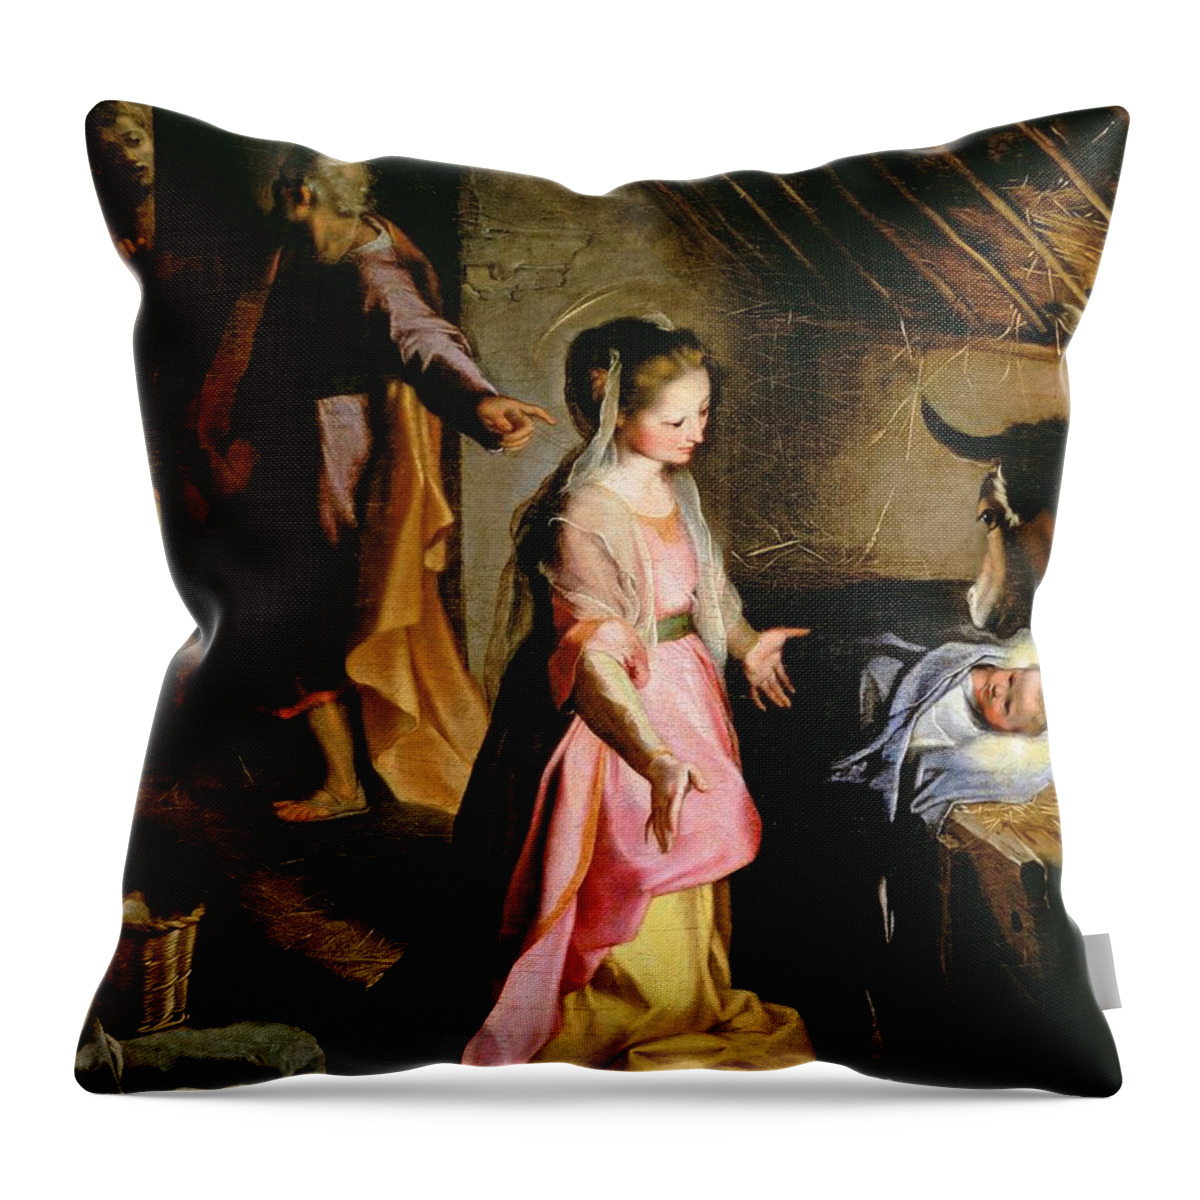 Nativity Throw Pillow featuring the painting The Adoration of the Child by Federico Fiori Barocci or Baroccio